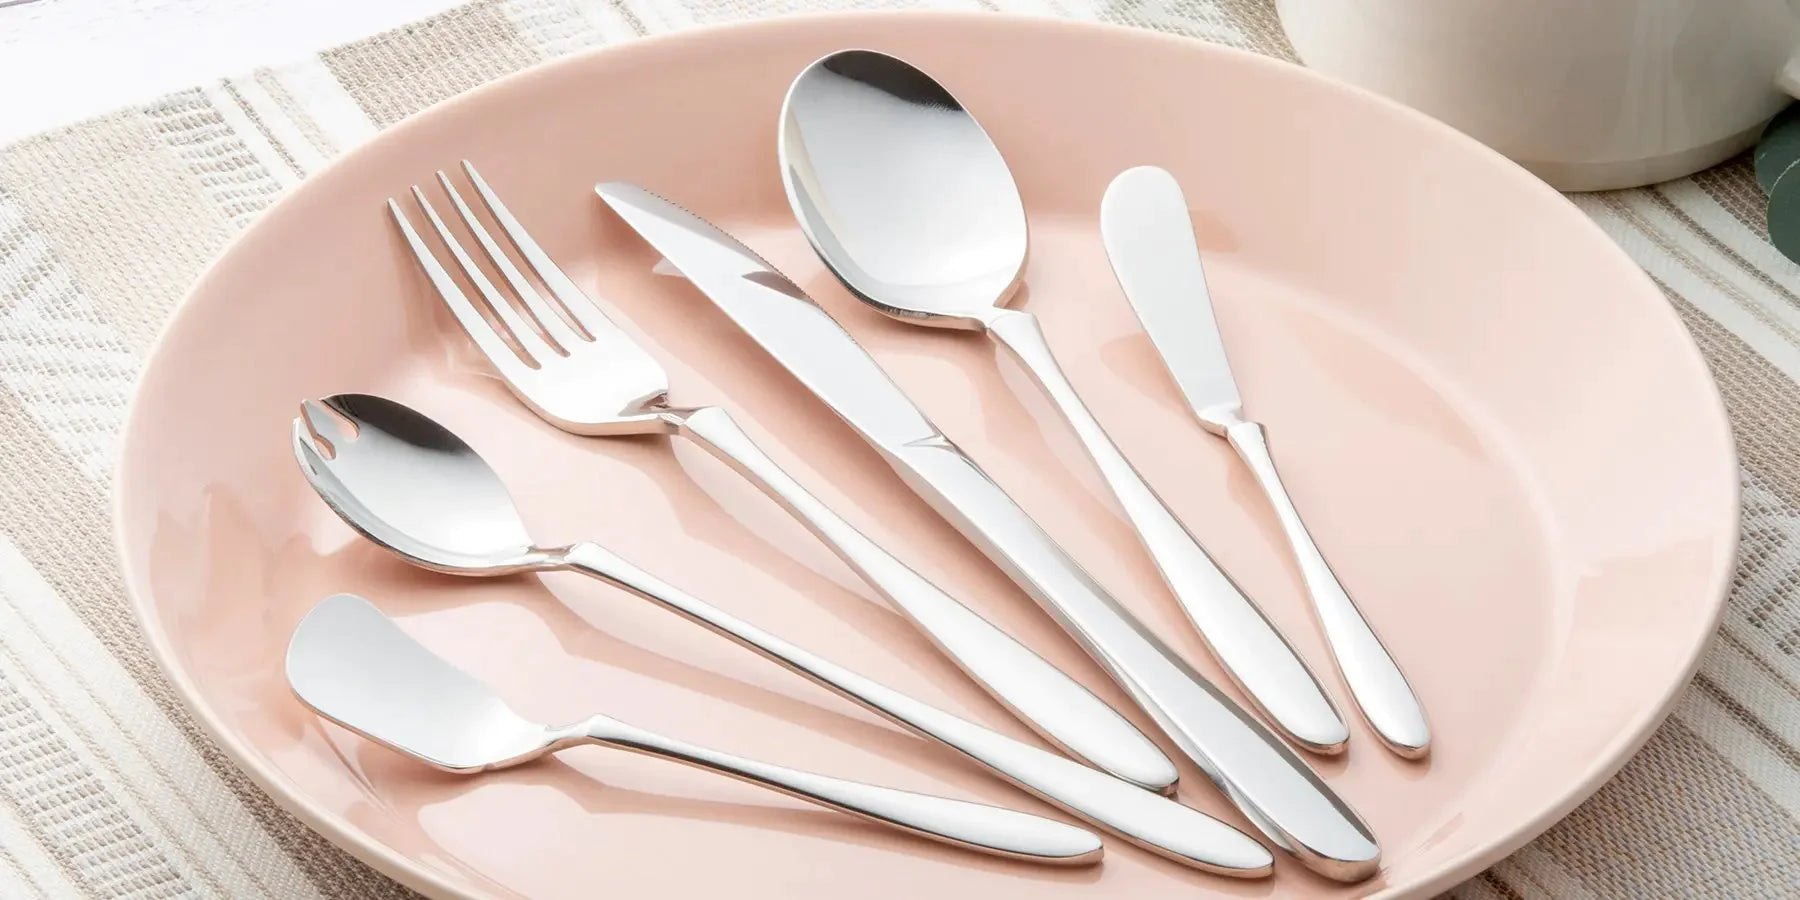 Discover our great selection of Flatware Sets at Globalkitchen Japan.